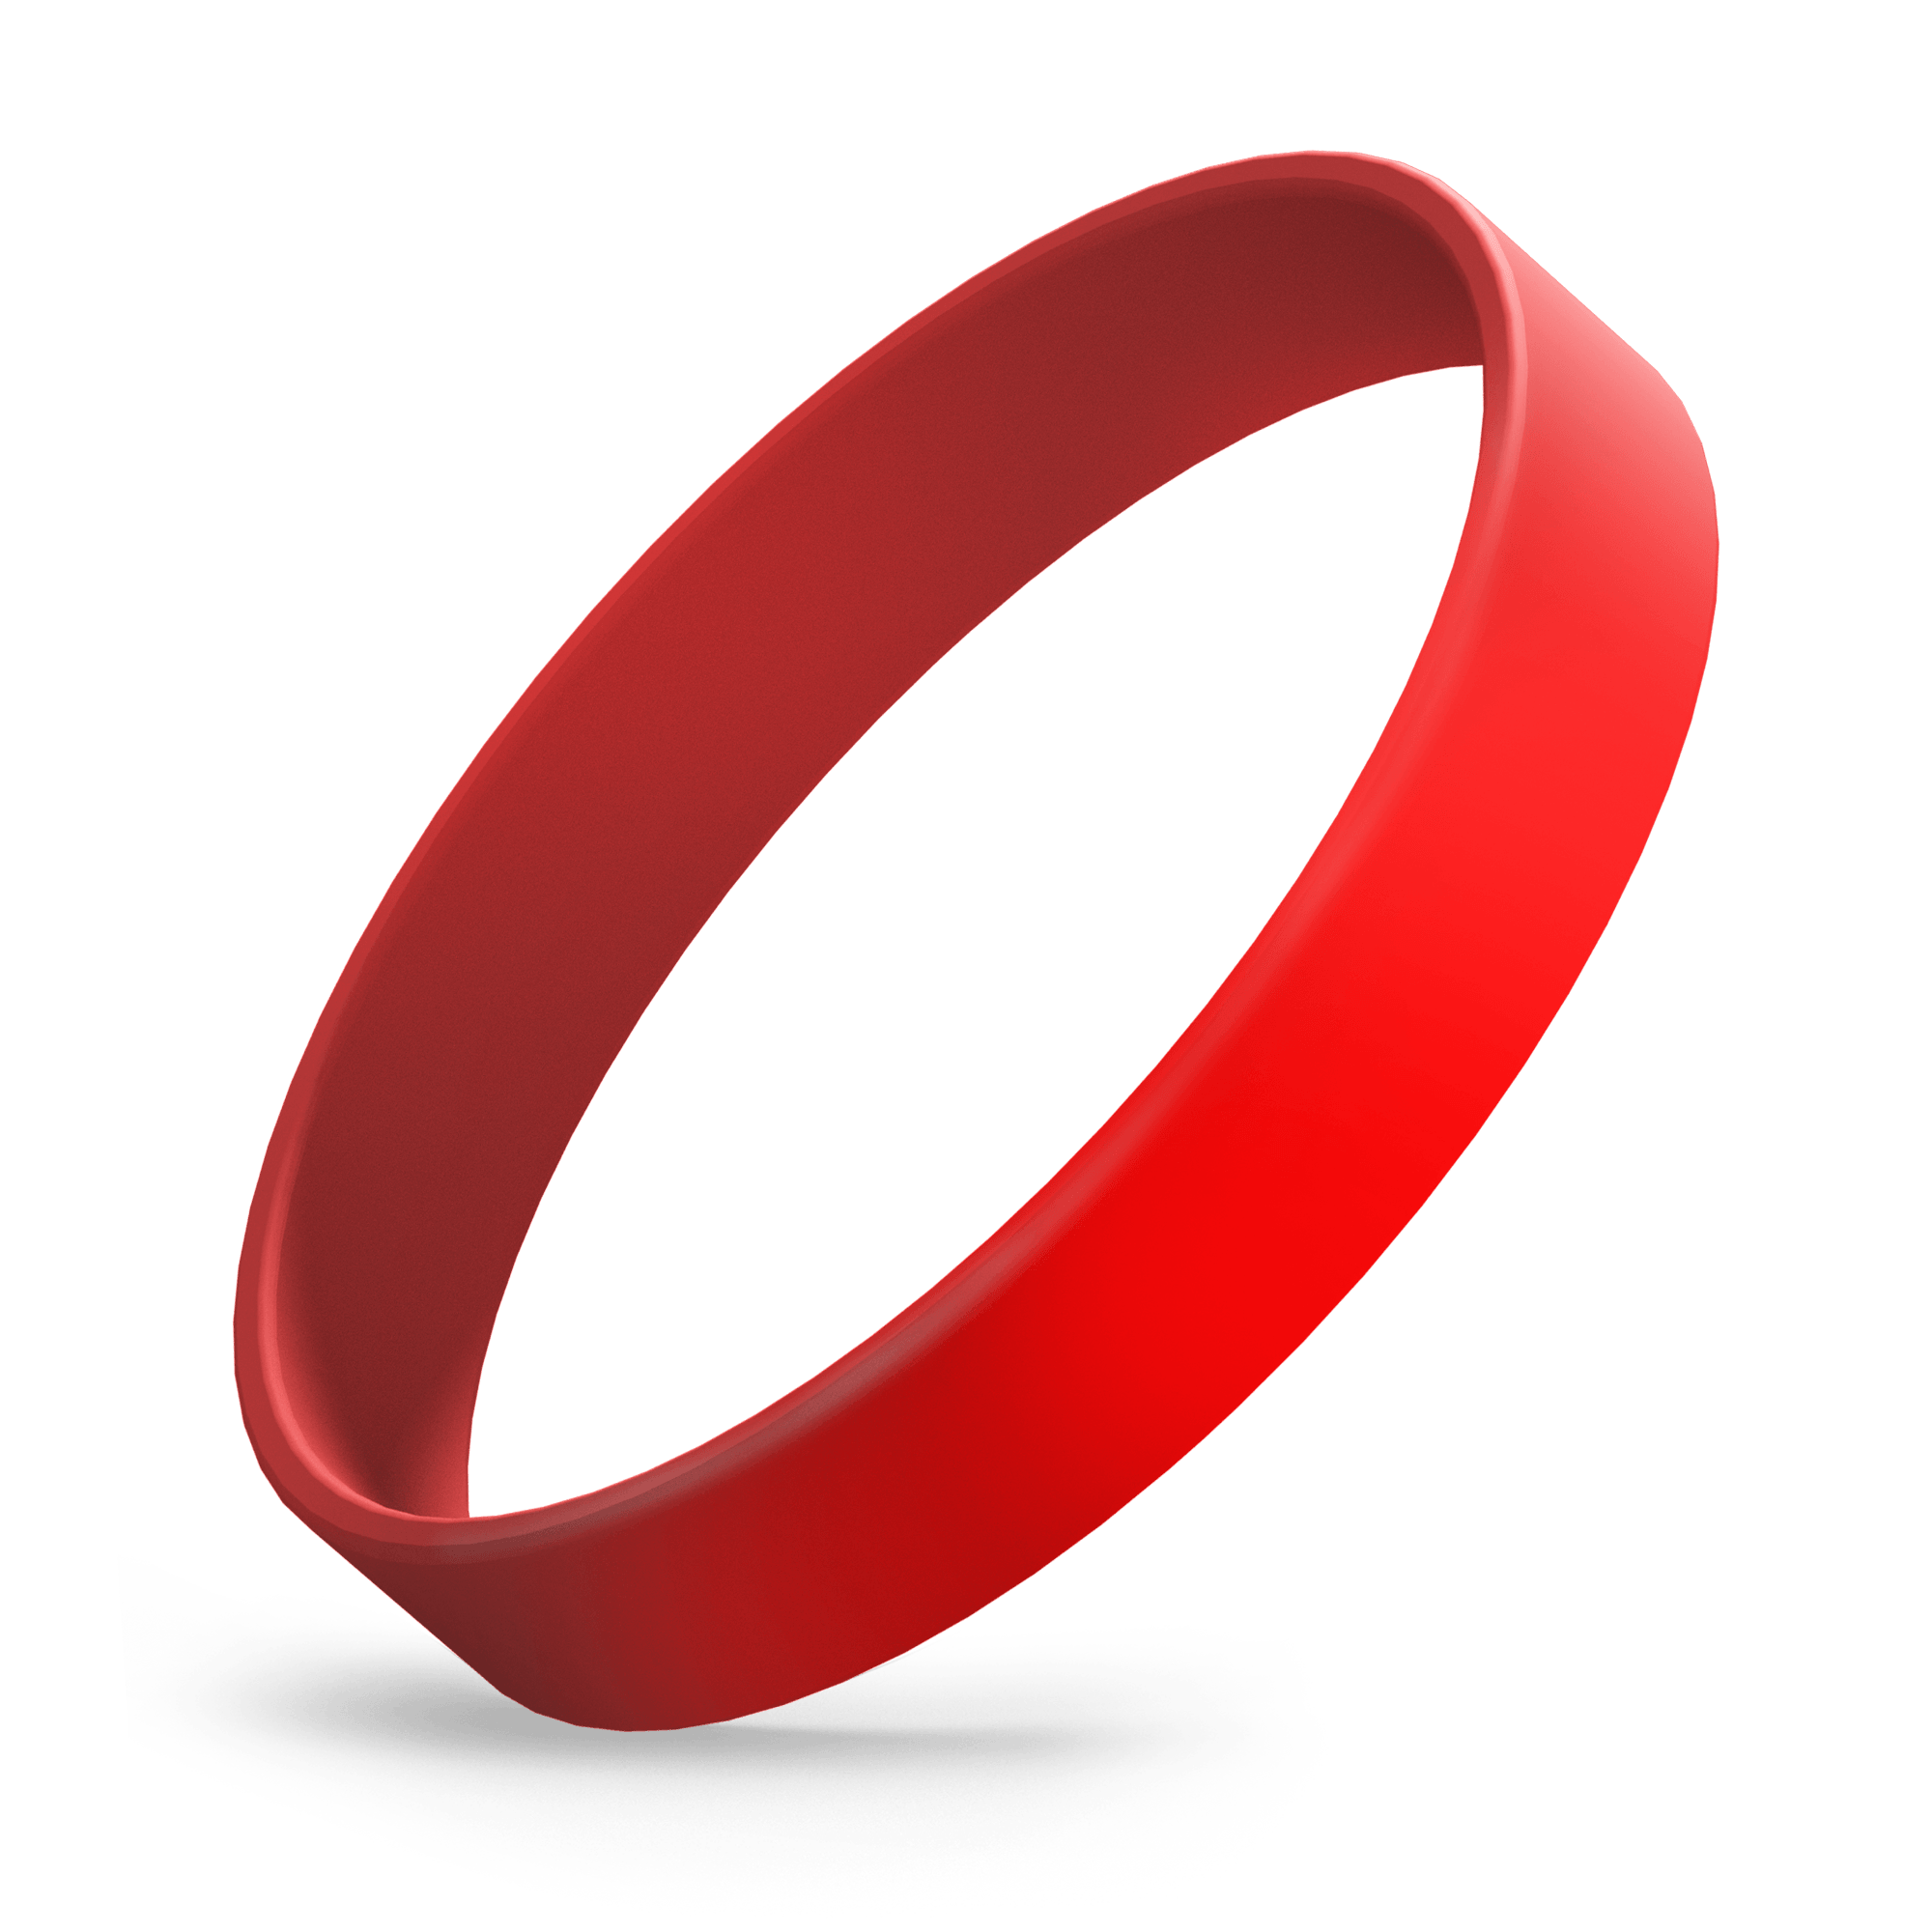 https://www.wristband.com/getmedia/6ea2a762-77c7-4224-9165-ae51b7d578dd/Silicone-Red.png.aspx?width=2000&height=2000&ext=.png